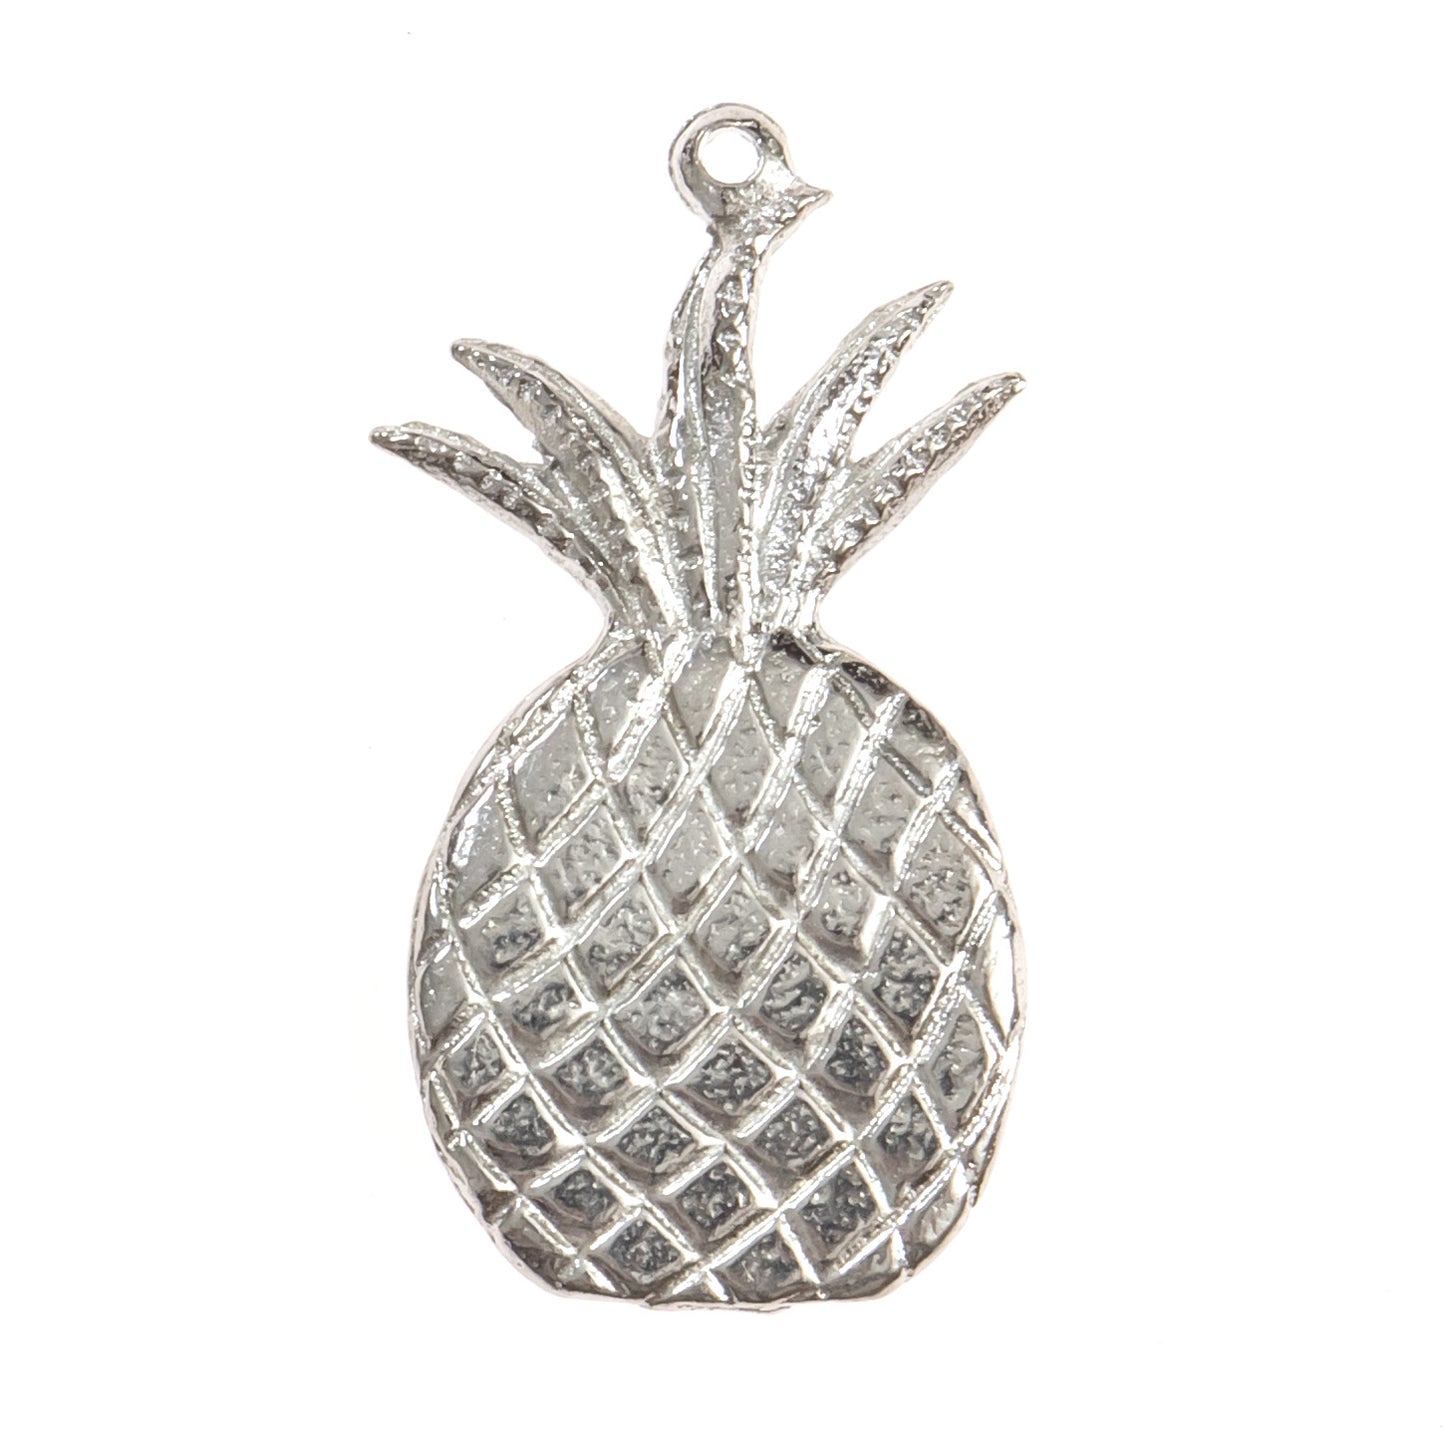 Pineapple Pendant Jewelry - Pendant Only or Necklace Set